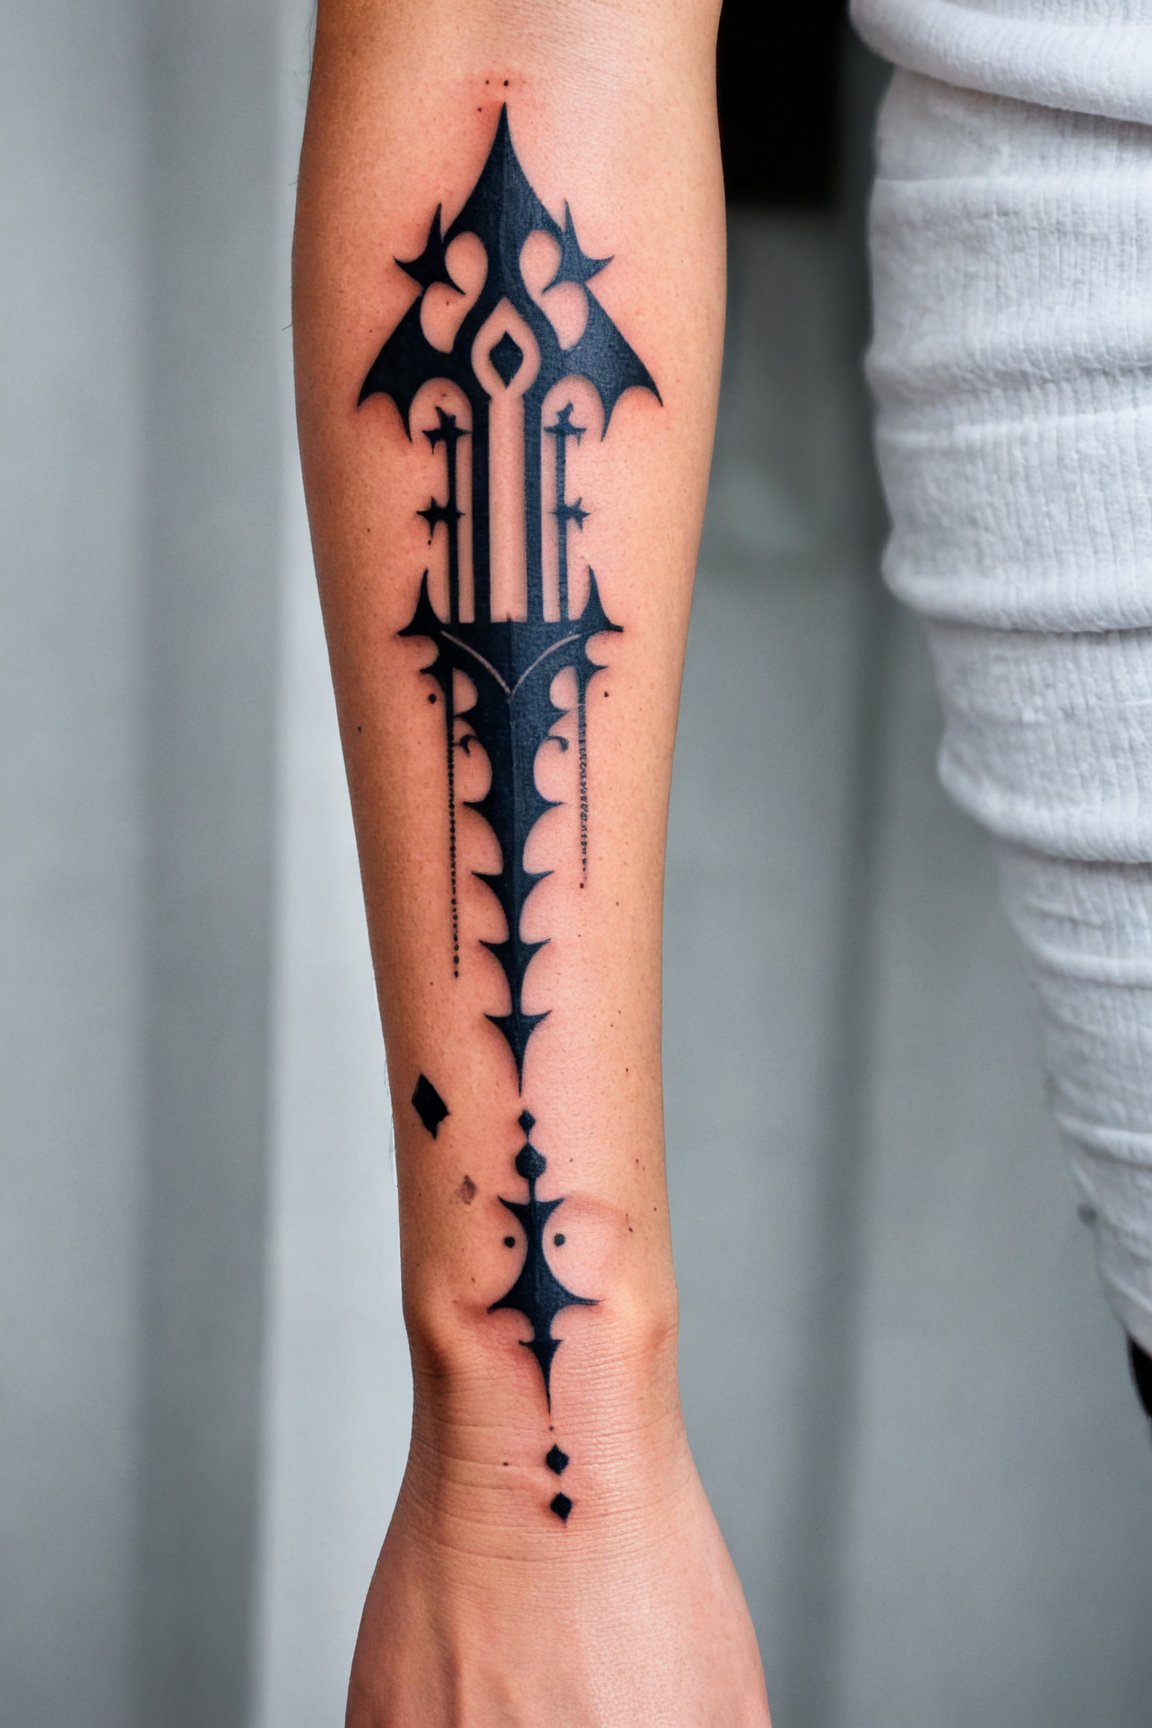 Tattoo on wrist, tattoo design, woman's arm with a neogothic tattoo on the left side of the arm